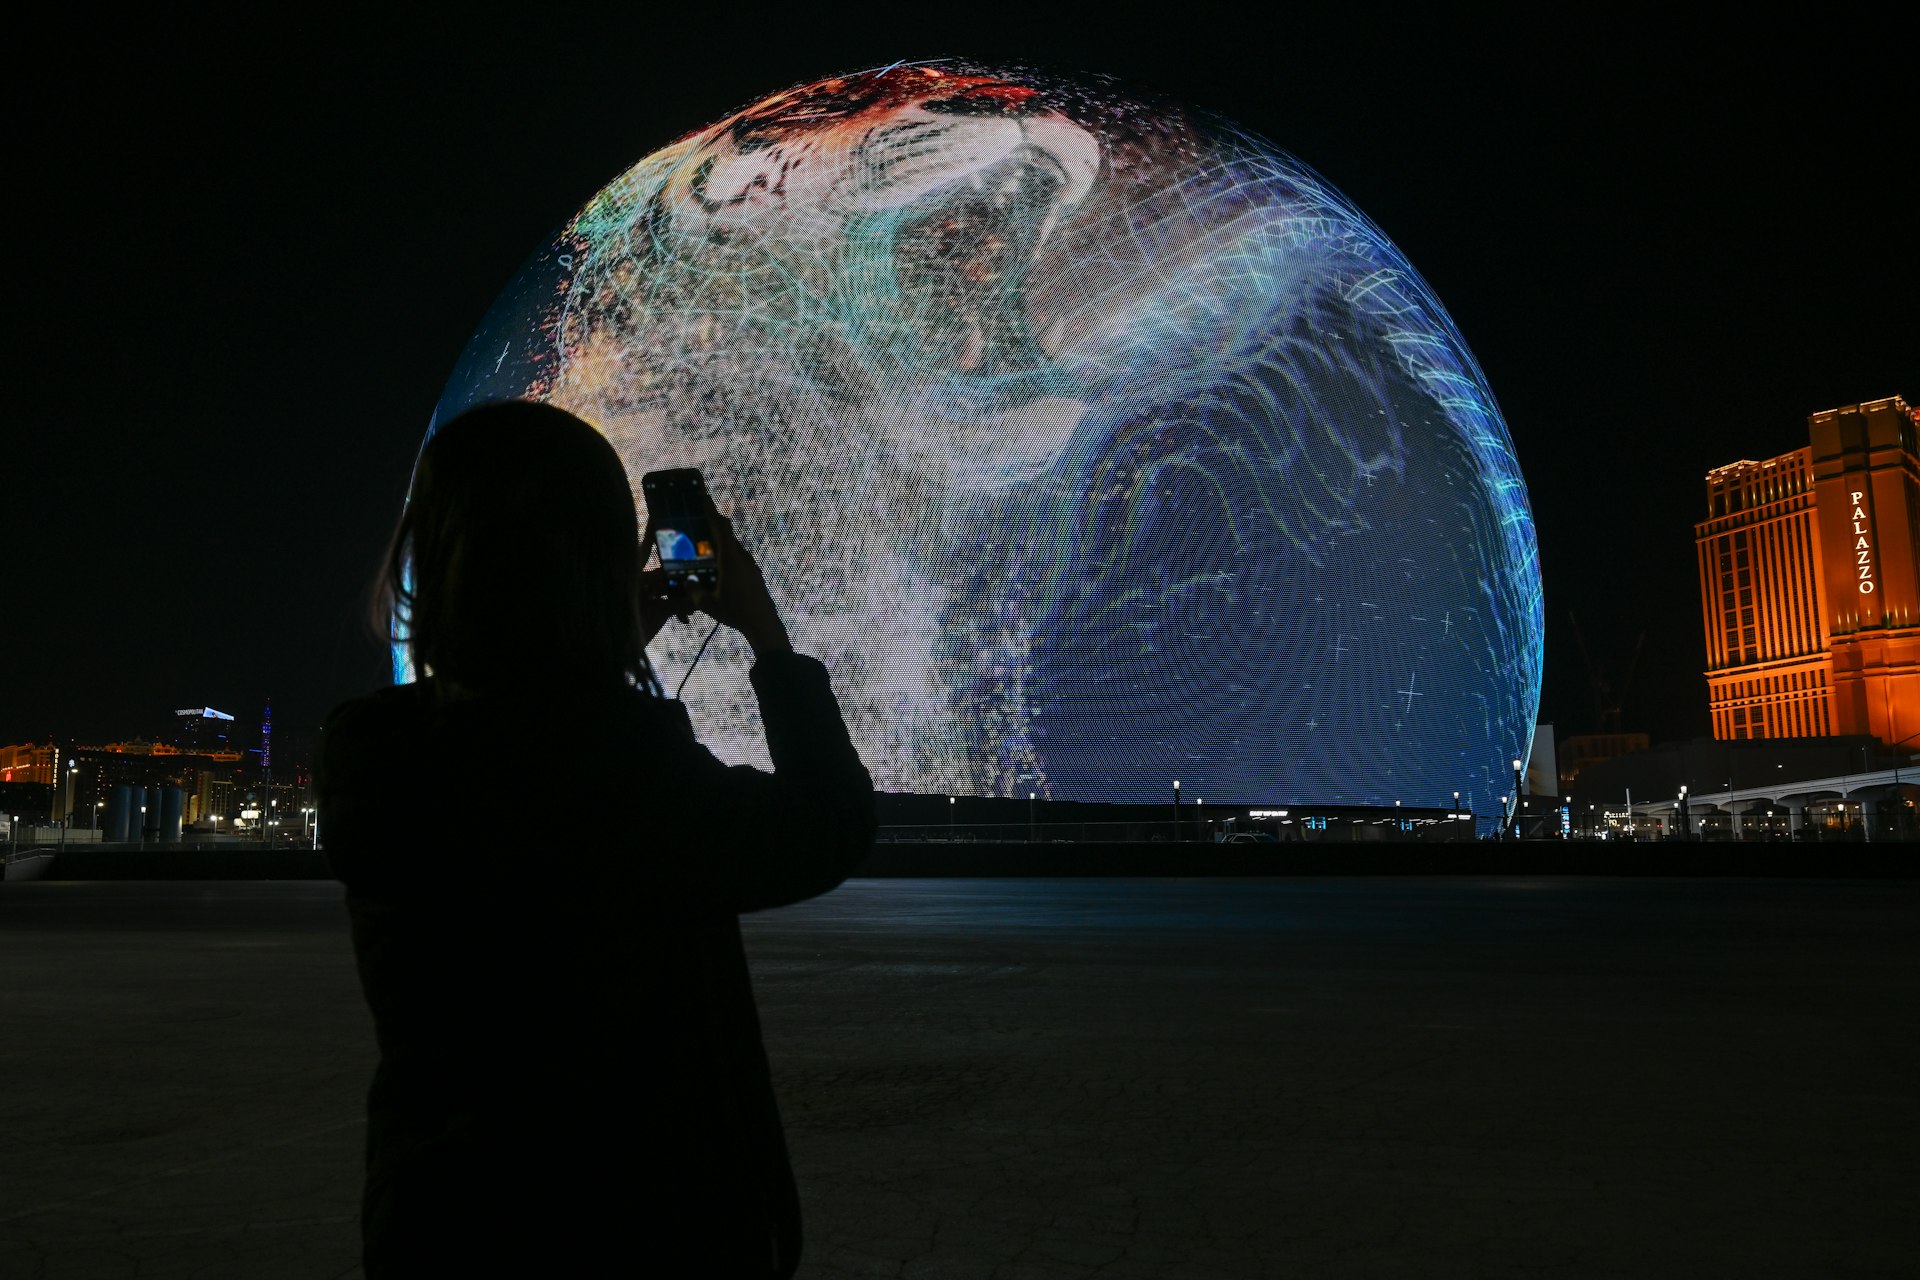 A person takes a photo of the illuminated Sphere venue in Las Vegas